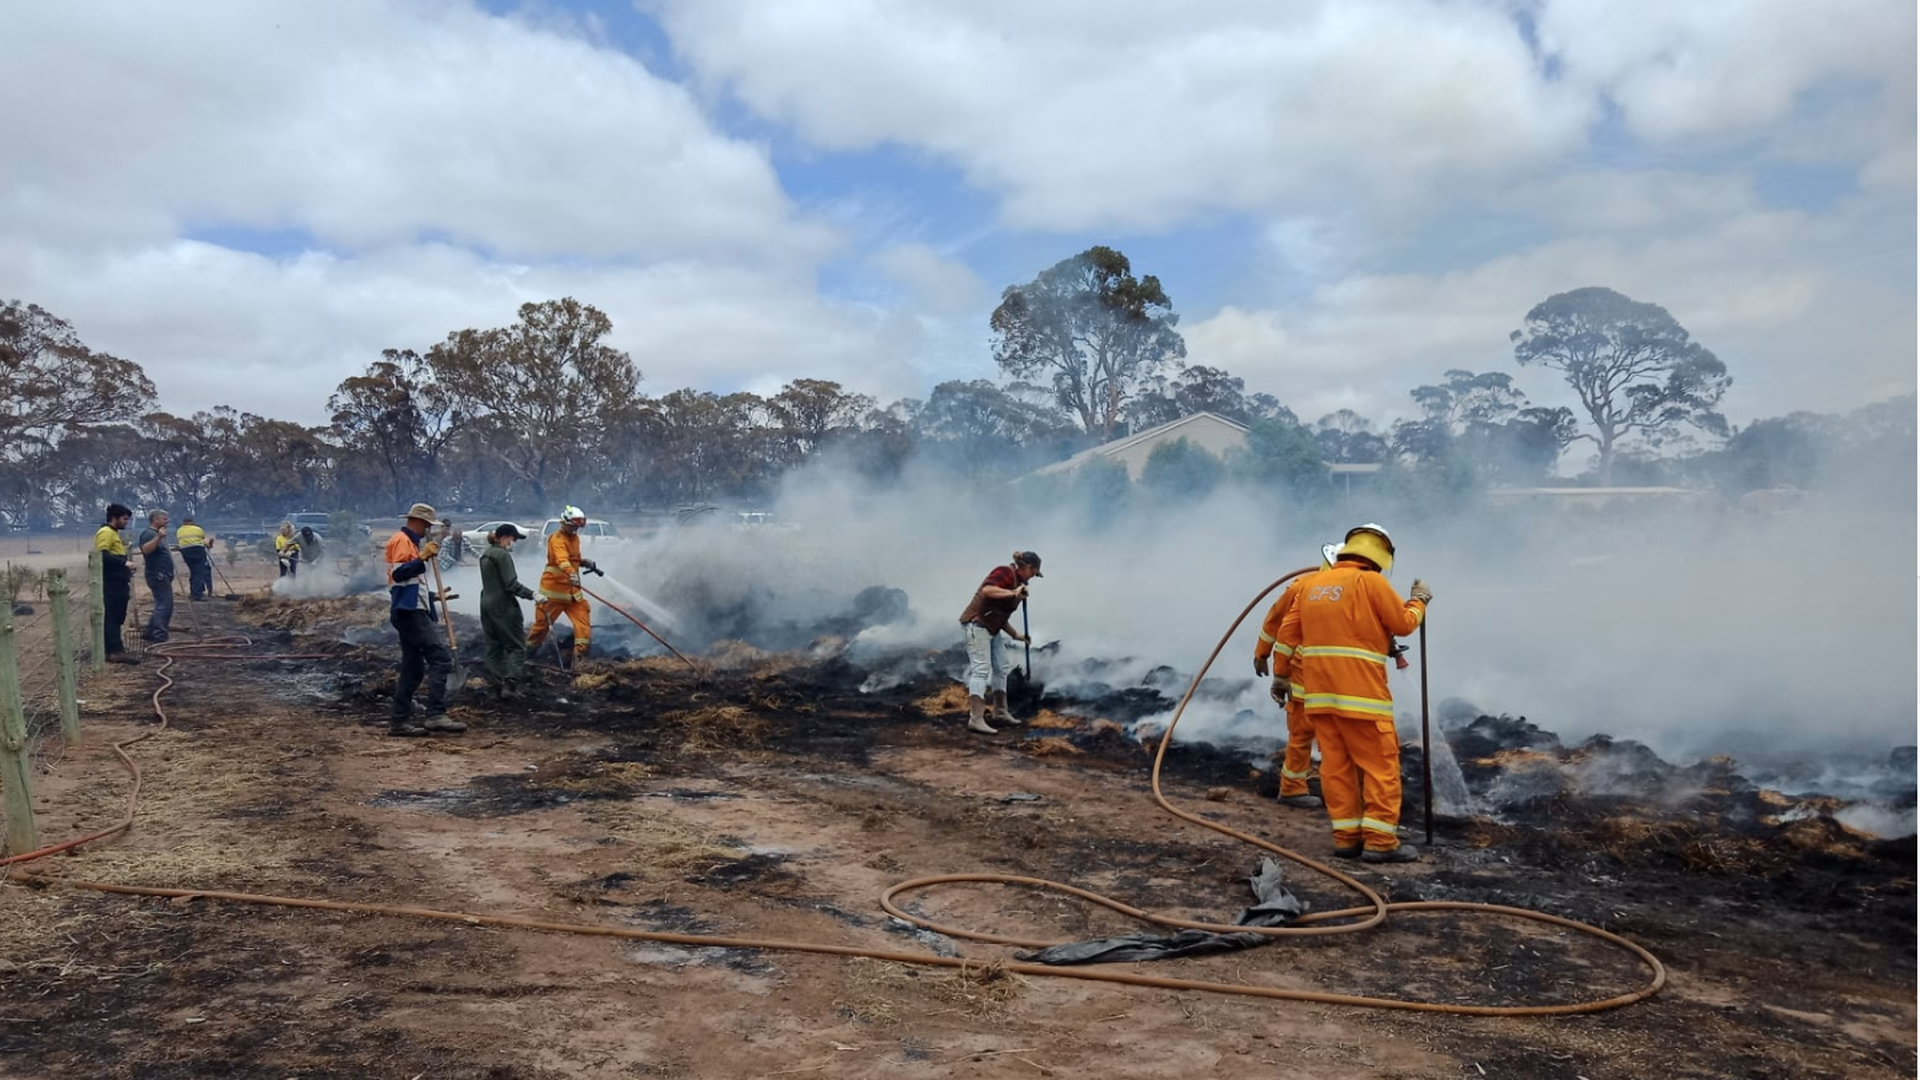 Firefighters in the Adelaide Hills, in the state of South Australia, working with locals to extinguishi a hay bales blaze and assisting with fire protection efforts